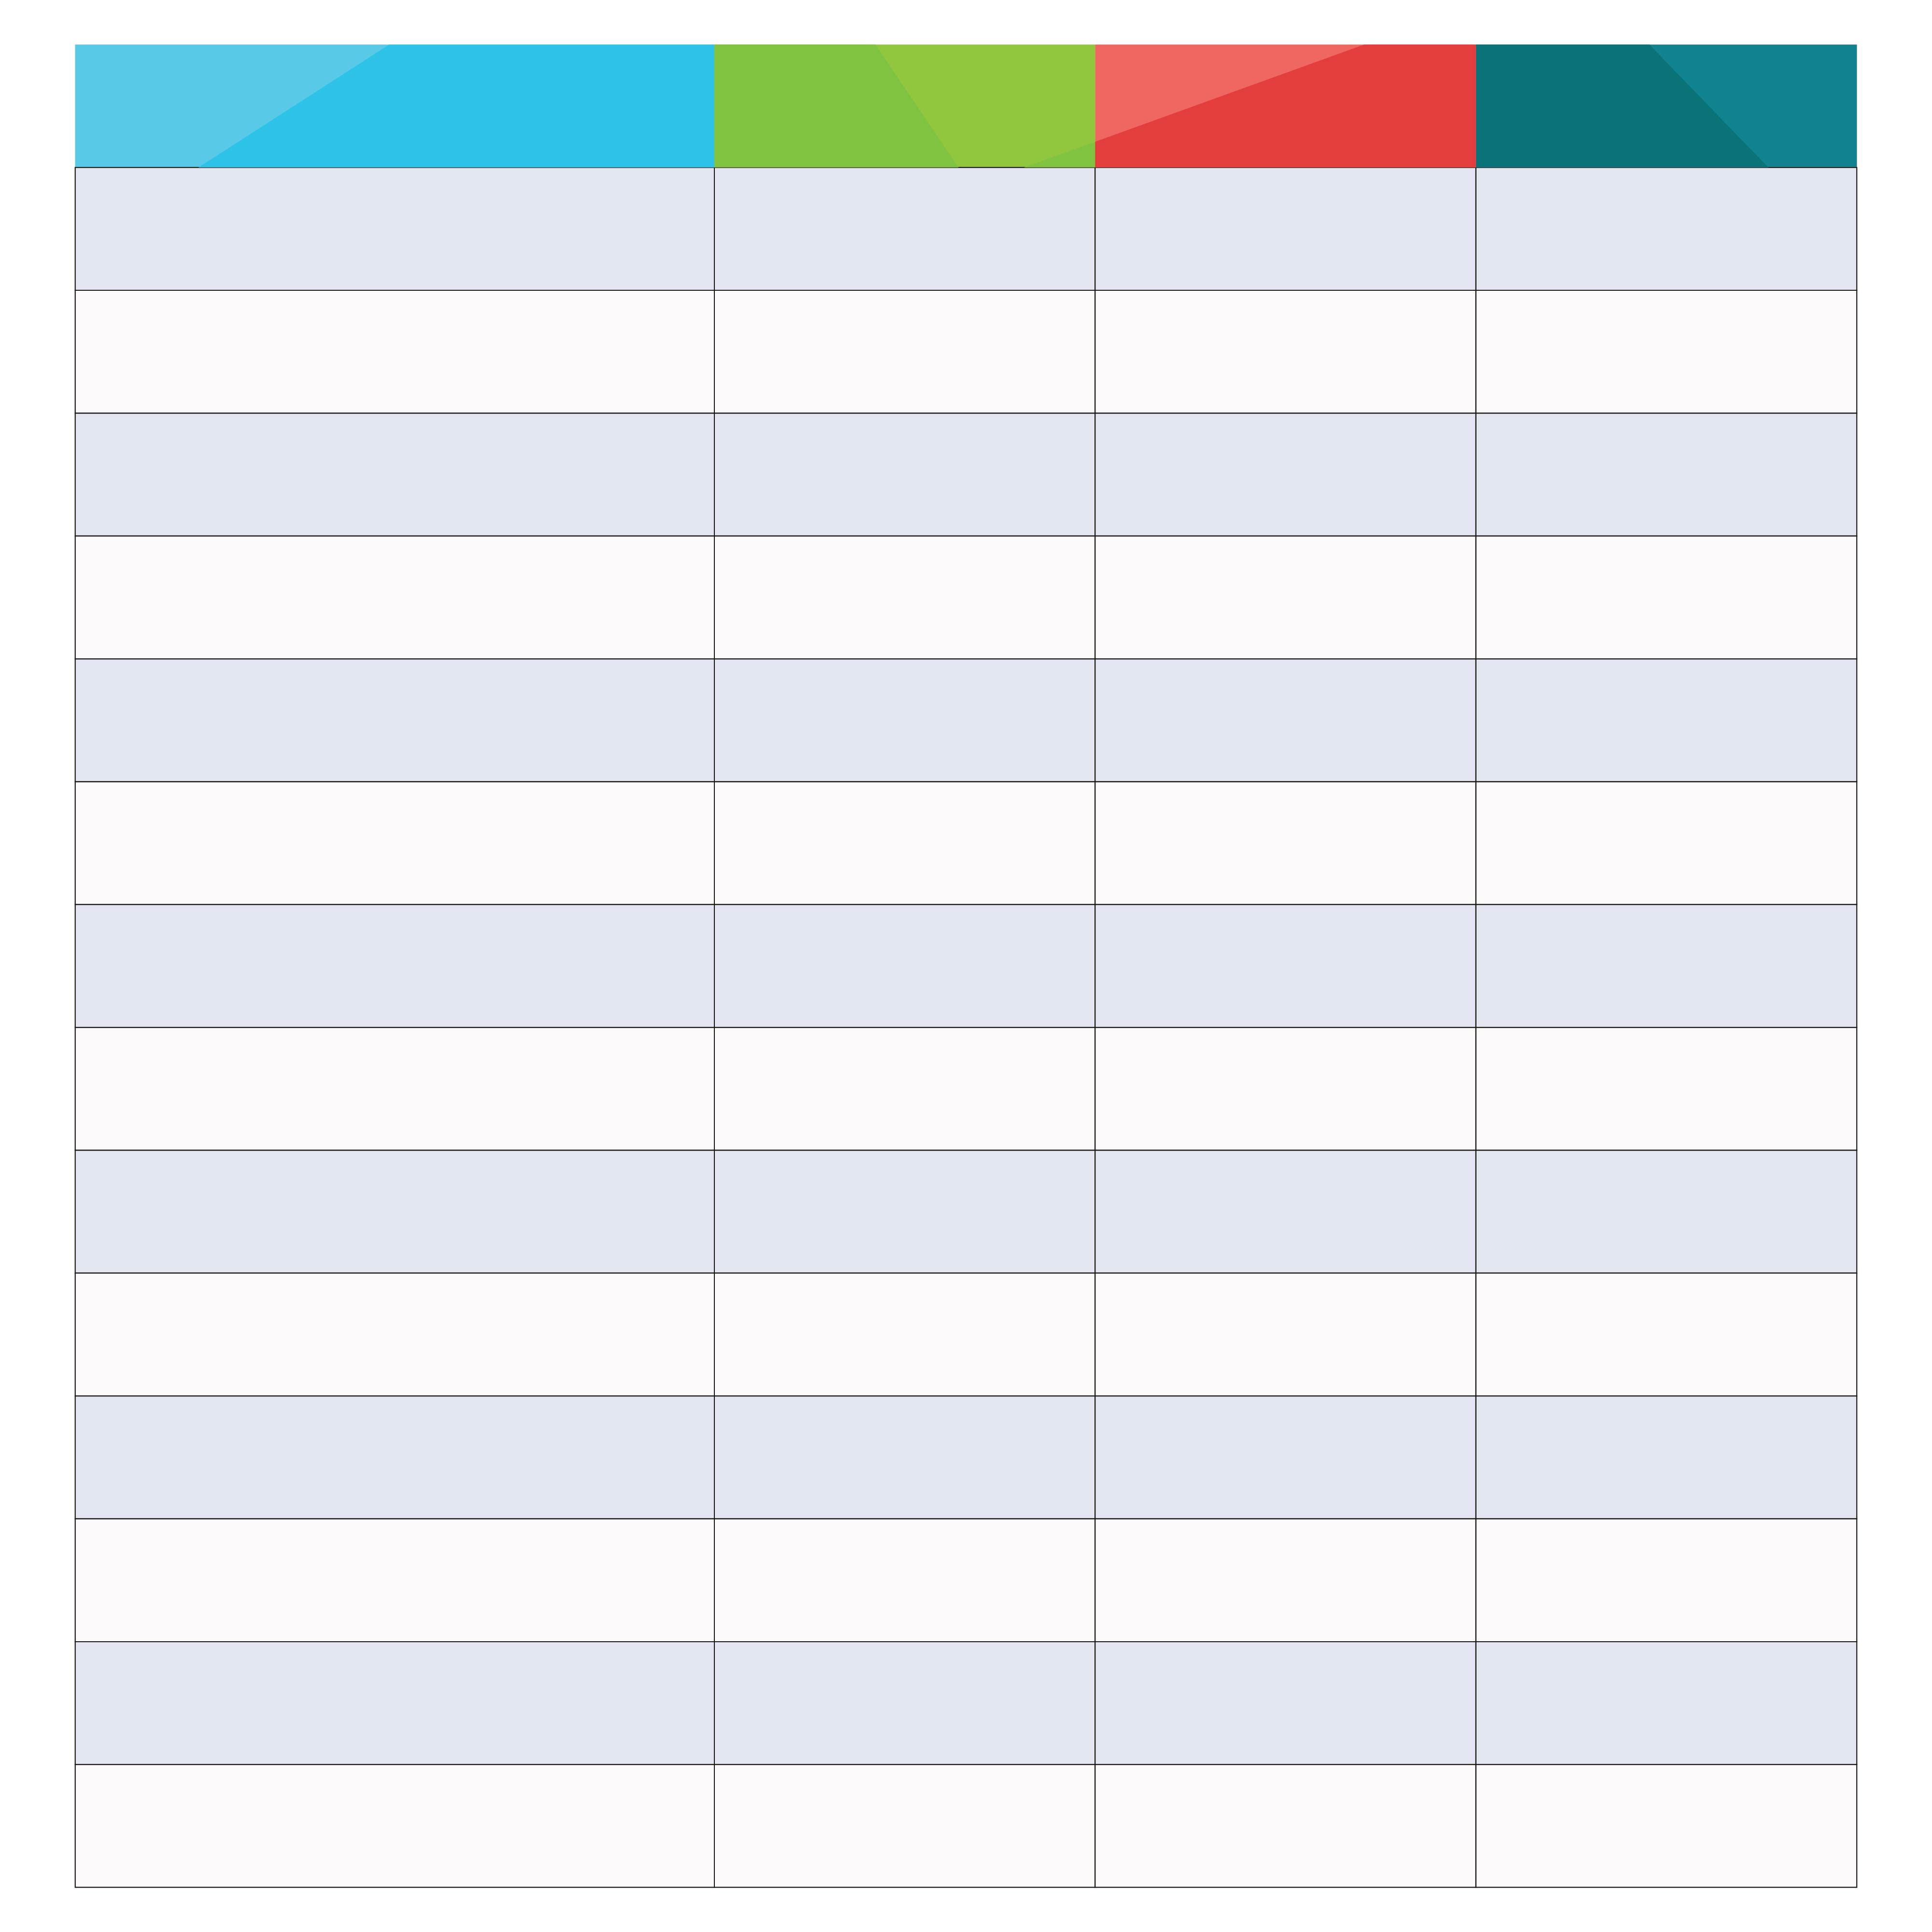 5 Best Images Of Easy Printable Spreadsheets Printable Blank Excel